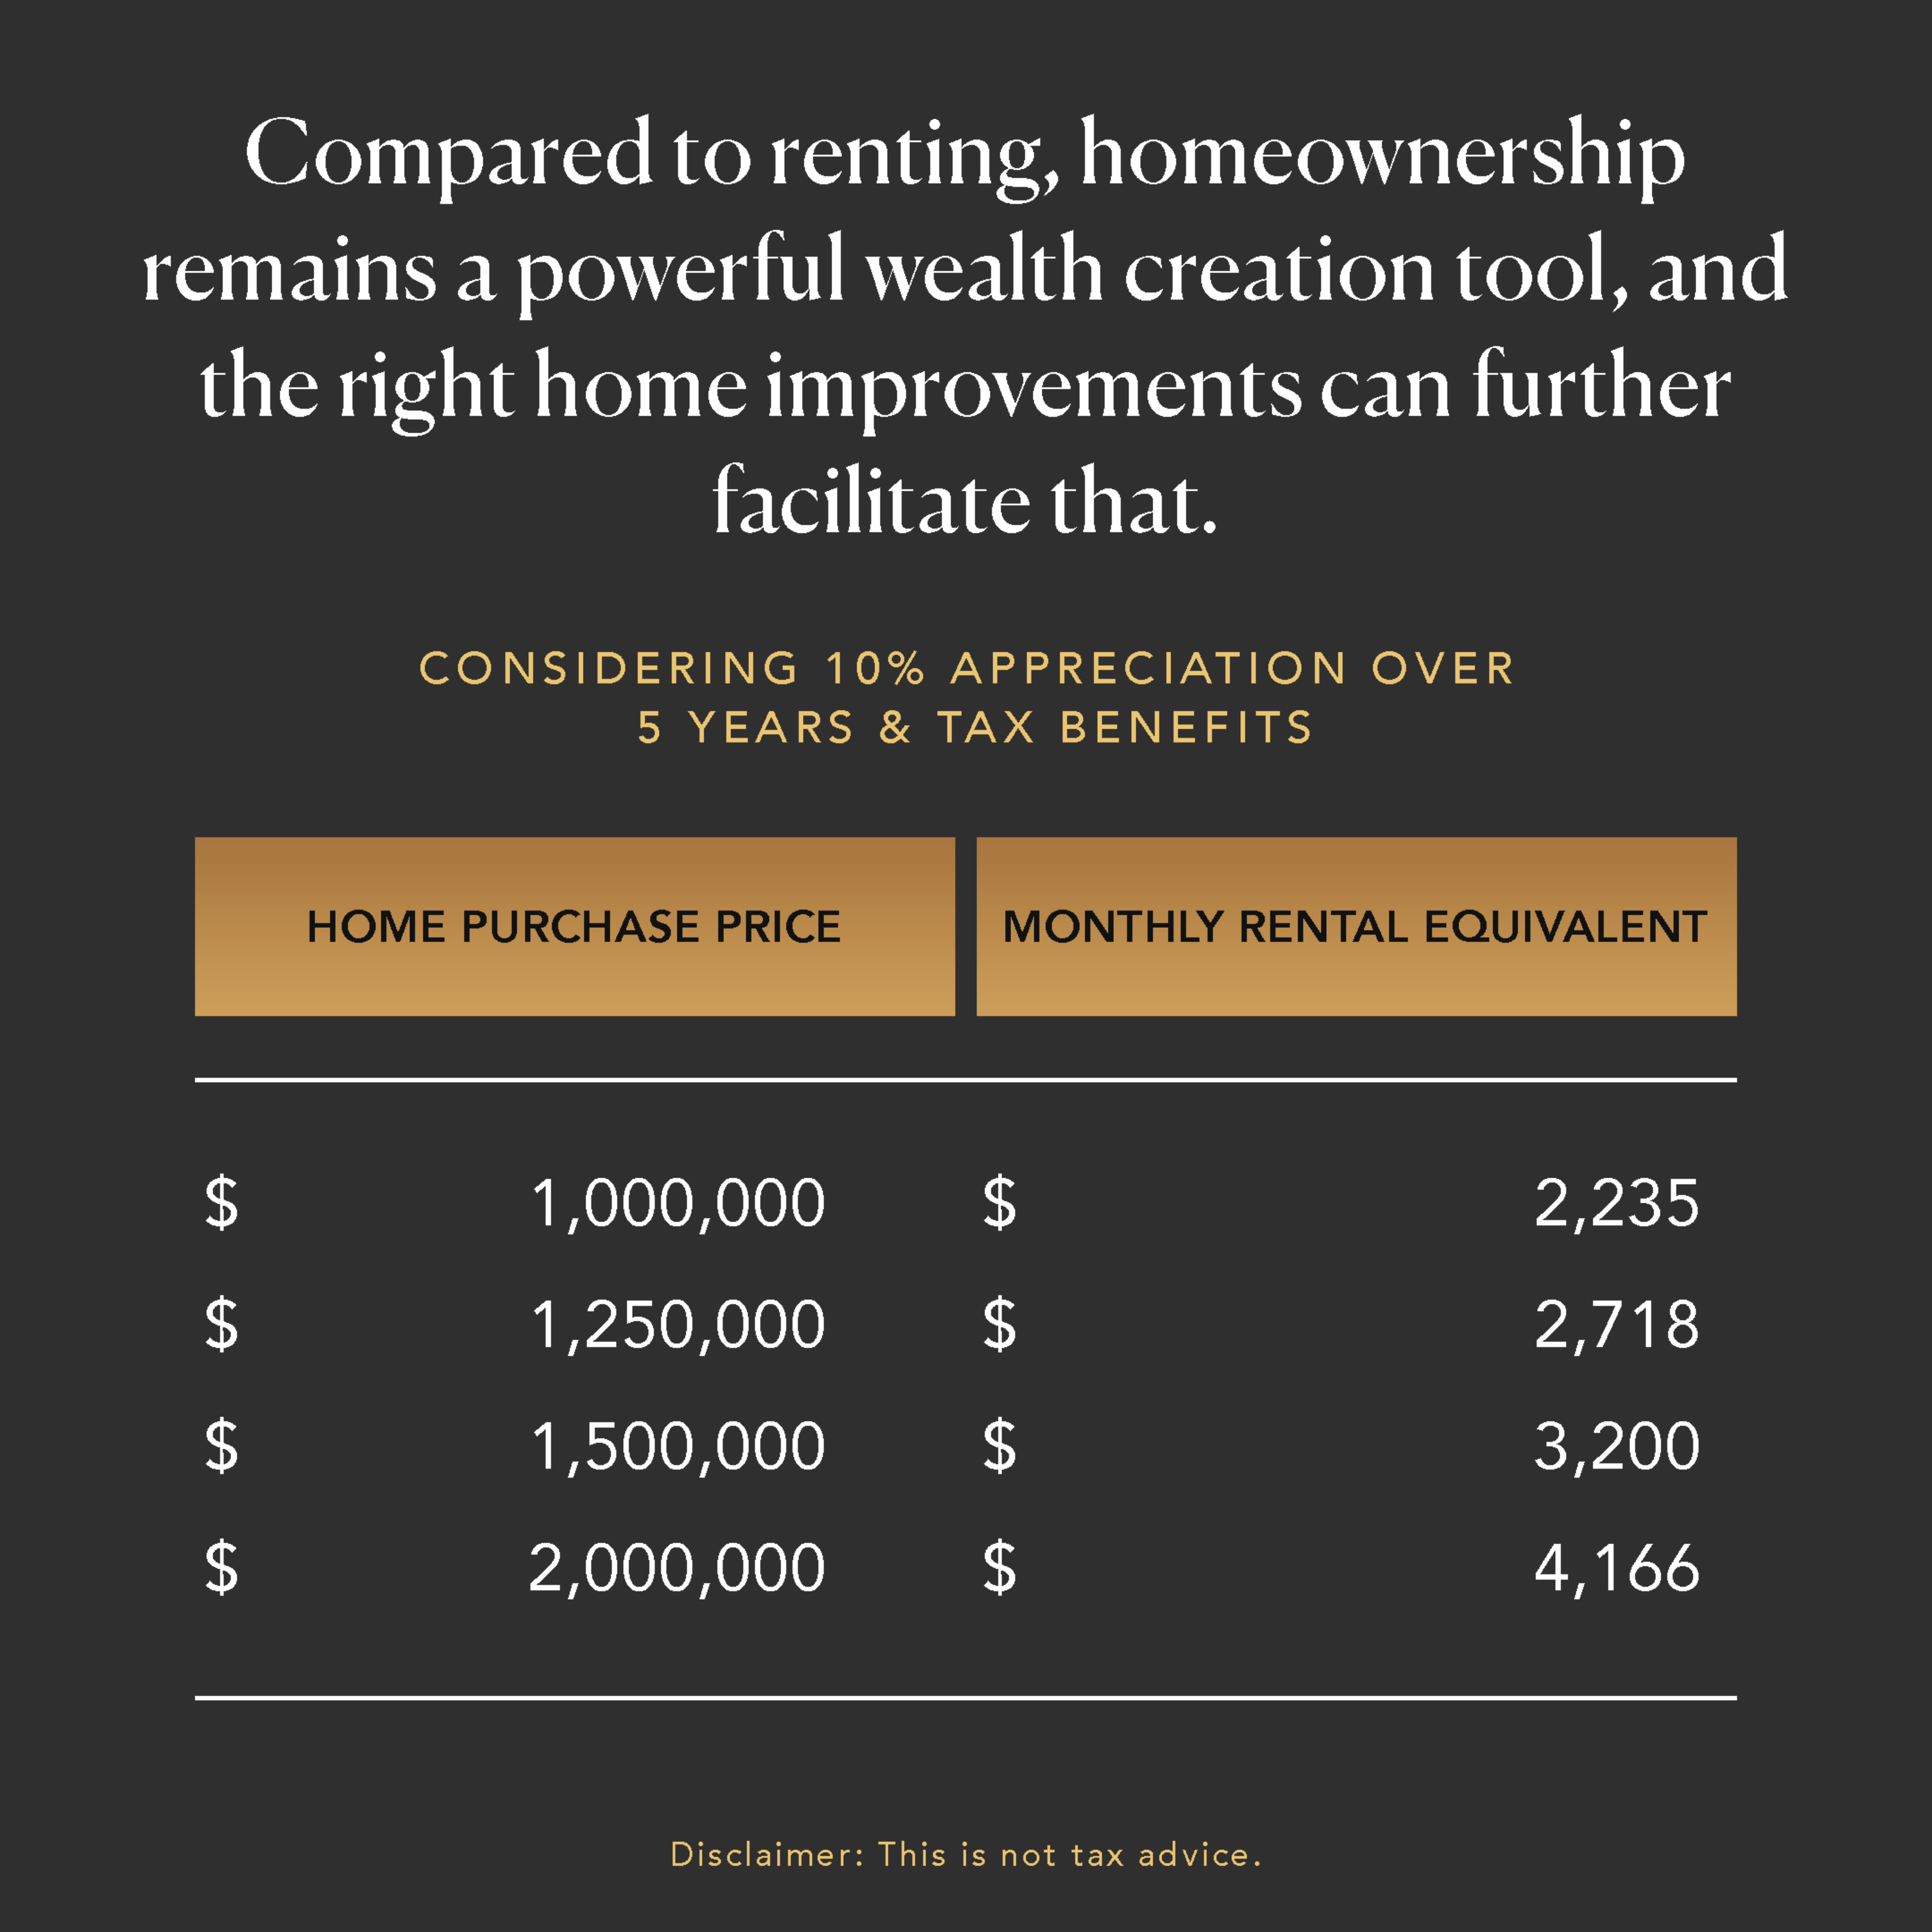 Compared to renting, homeownership remains a powerful wealth creation tool, and the right home improvements can further facilitate that.